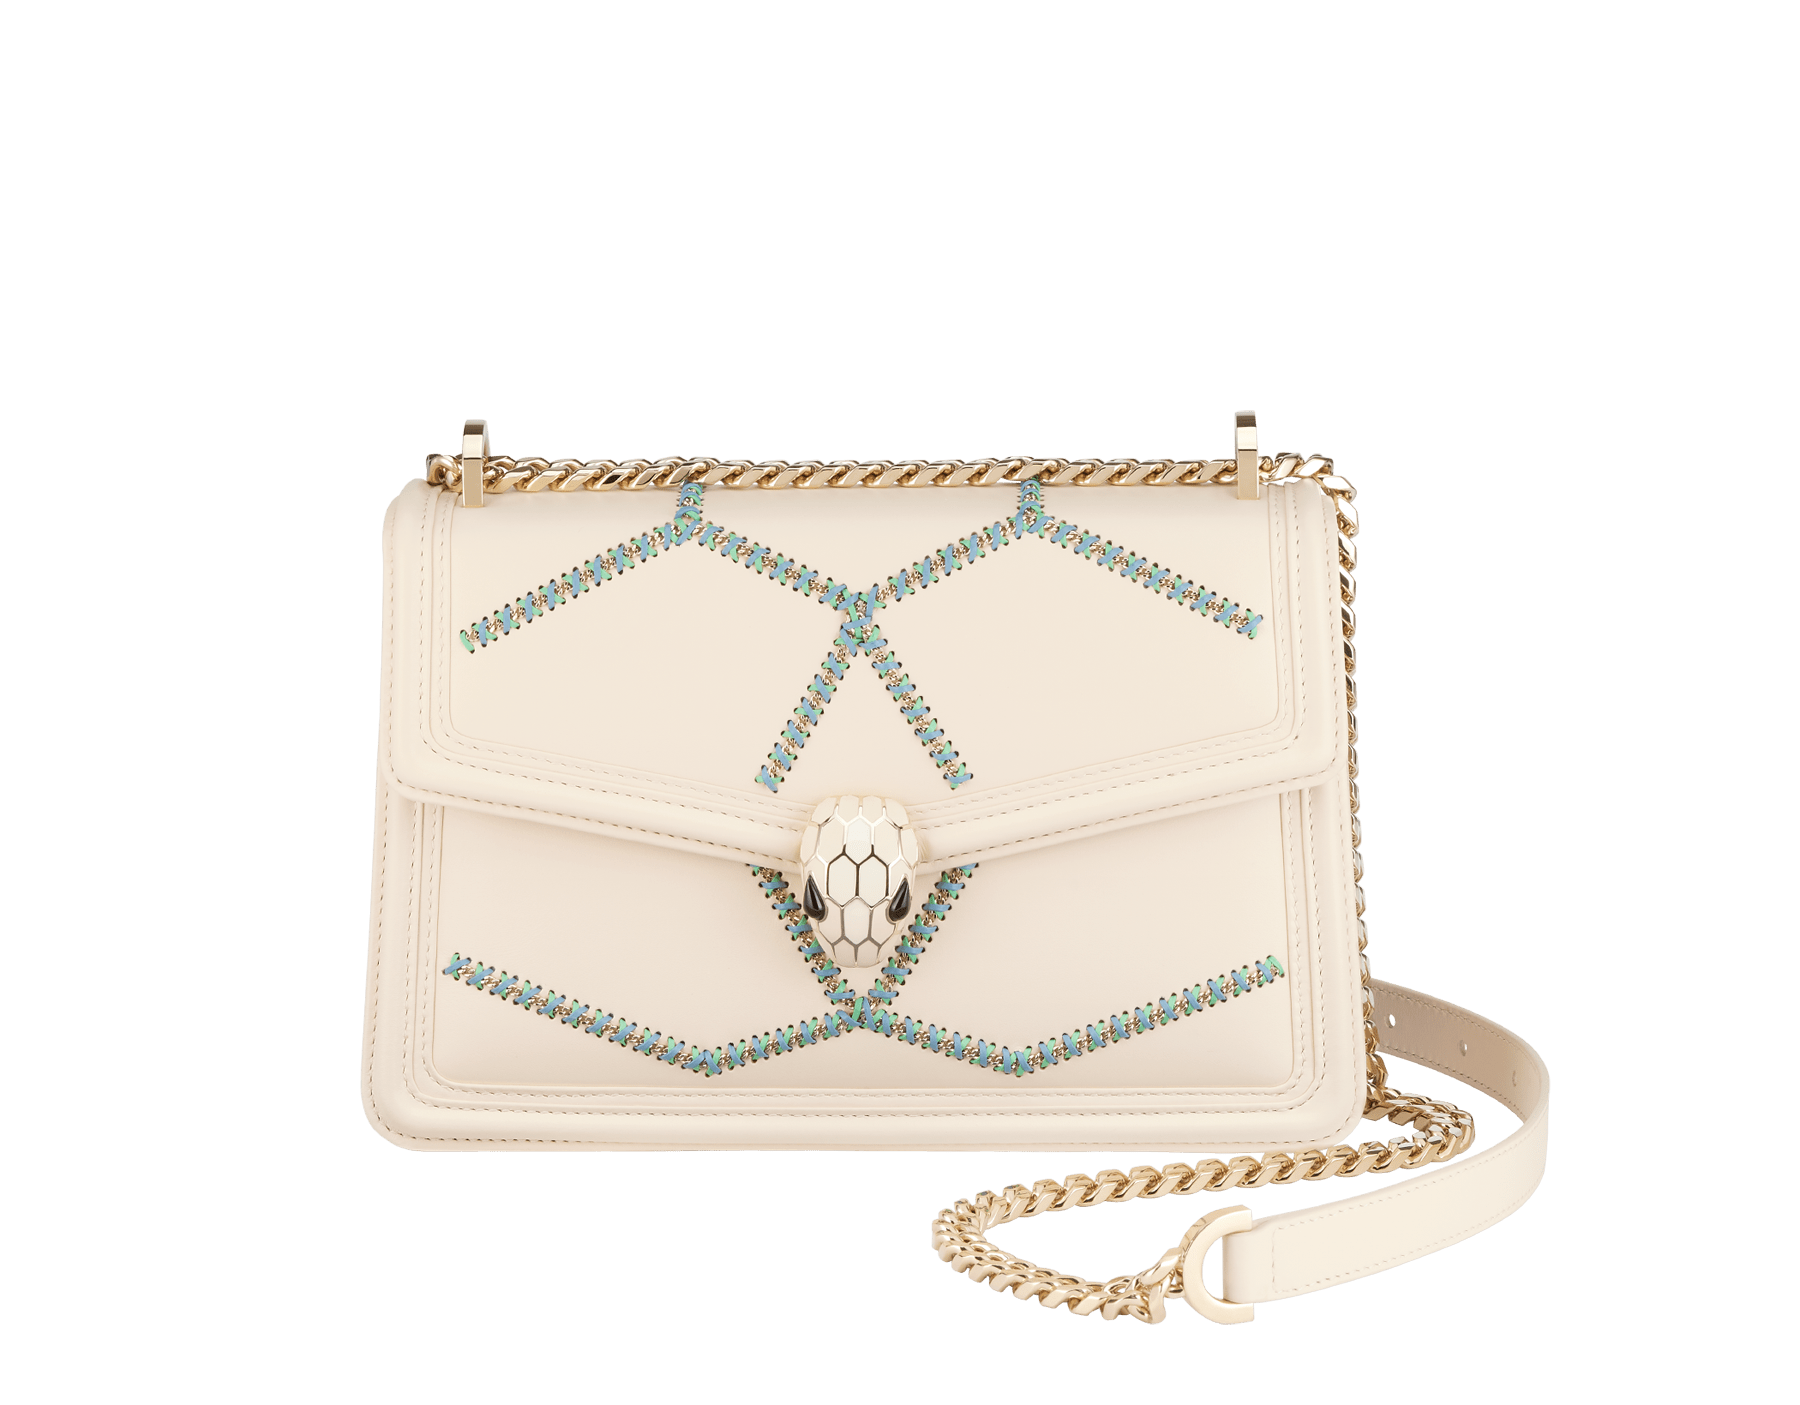 Serpenti Diamond Blast small shoulder bag in ivory opal calf leather with twisted chain and leather décor, and Niagara sapphire blue nappa leather lining. Captivating snakehead closure in light gold-plated brass embellished with matt and shiny ivory opal enamel scales and black onyx eyes. 291725 image 1